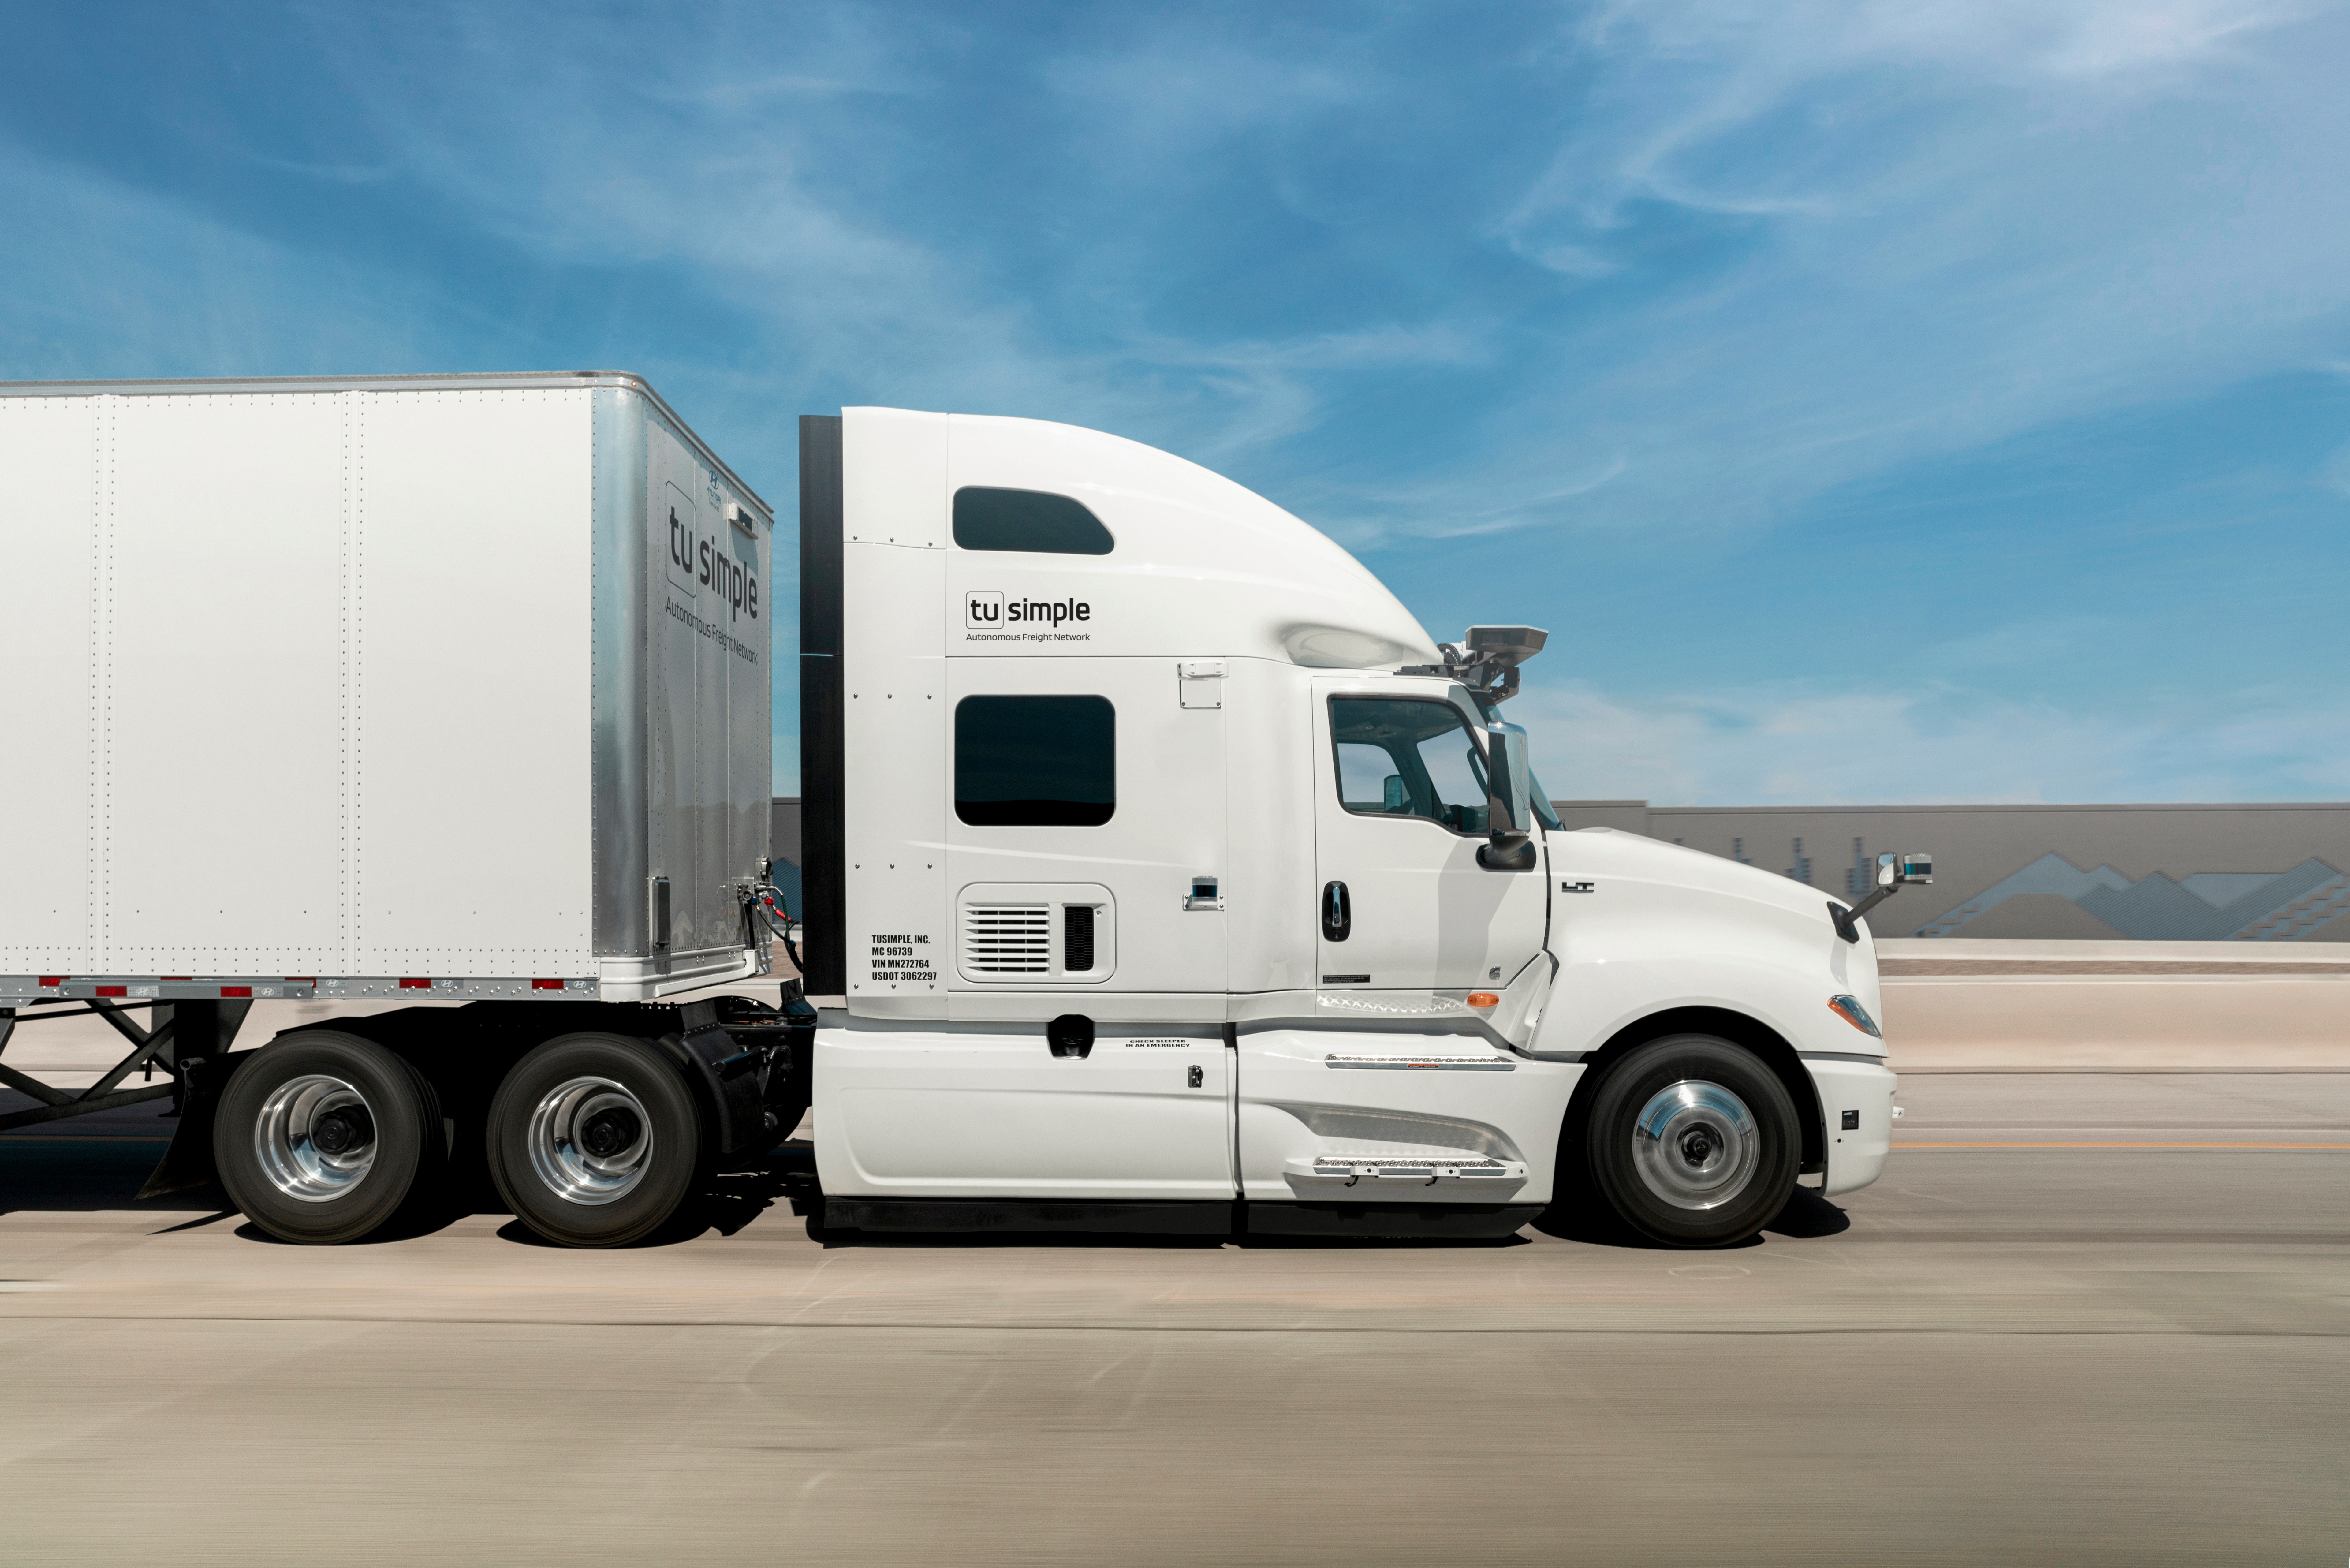 Cathie Wood Snaps Up $1M More Of This Self-driving Truck Startup On The Dip